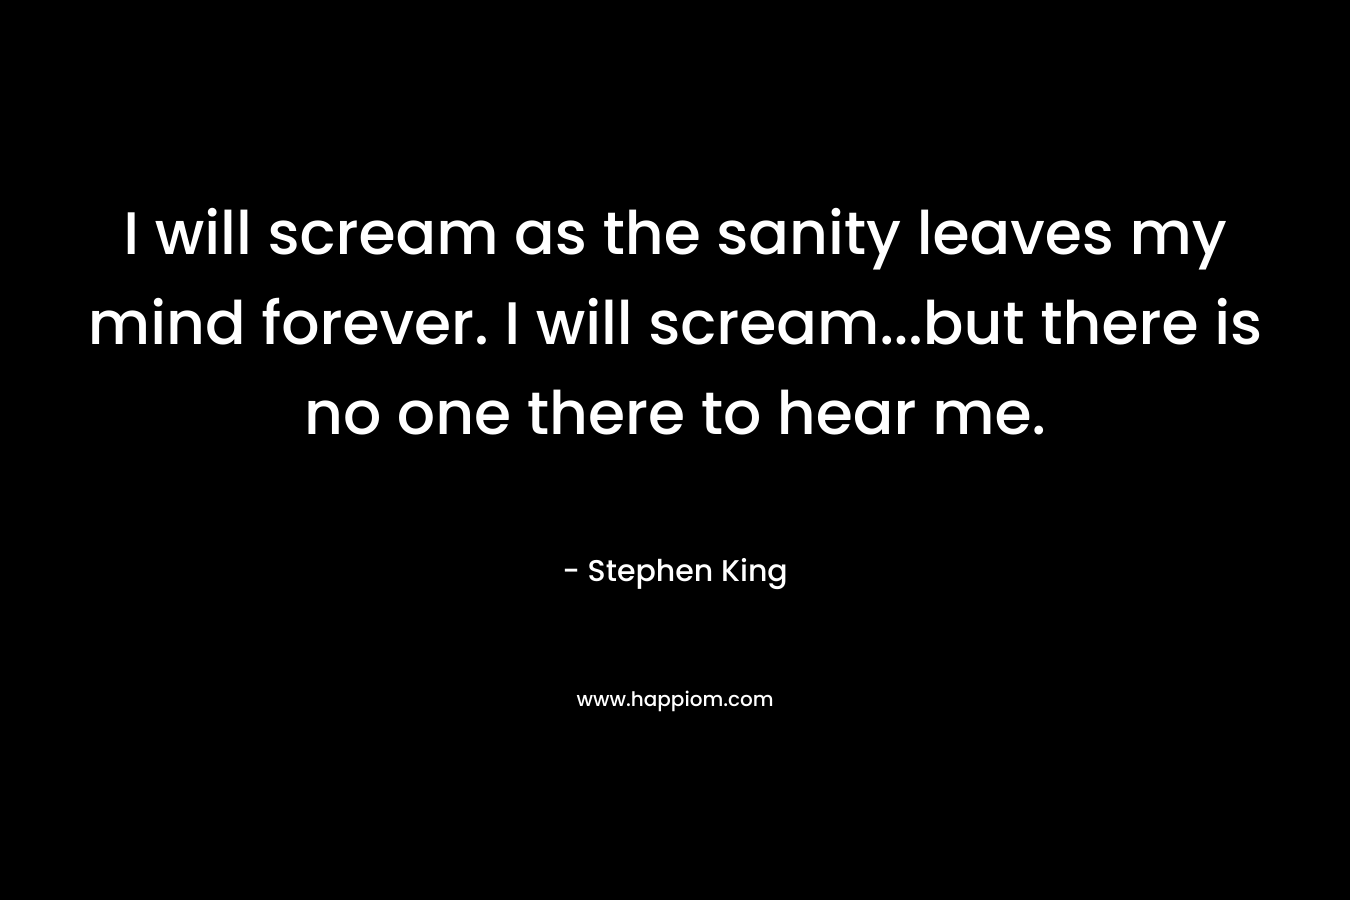 I will scream as the sanity leaves my mind forever. I will scream...but there is no one there to hear me.